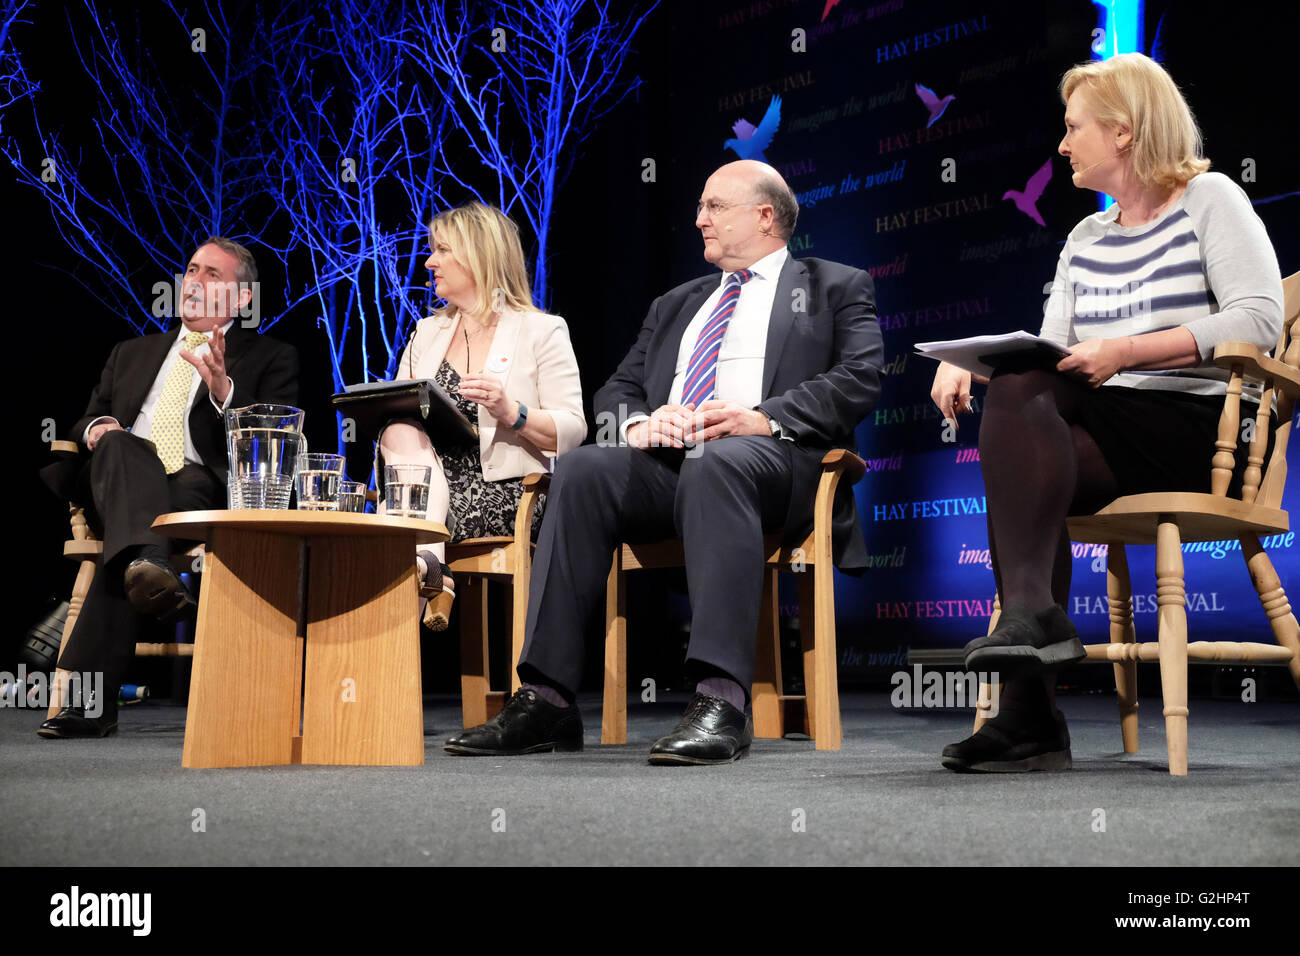 Hay Festival, Wales, UK - May 2016 -  EU Referendum debate - Does Britain Need the EU? The European Union debate sponsored by the Daily Telegraph features from left to right LIAM FOX MP answering, ALLISON PEARSON, ROGER BOOTLE, chair Martha Kearney Stock Photo